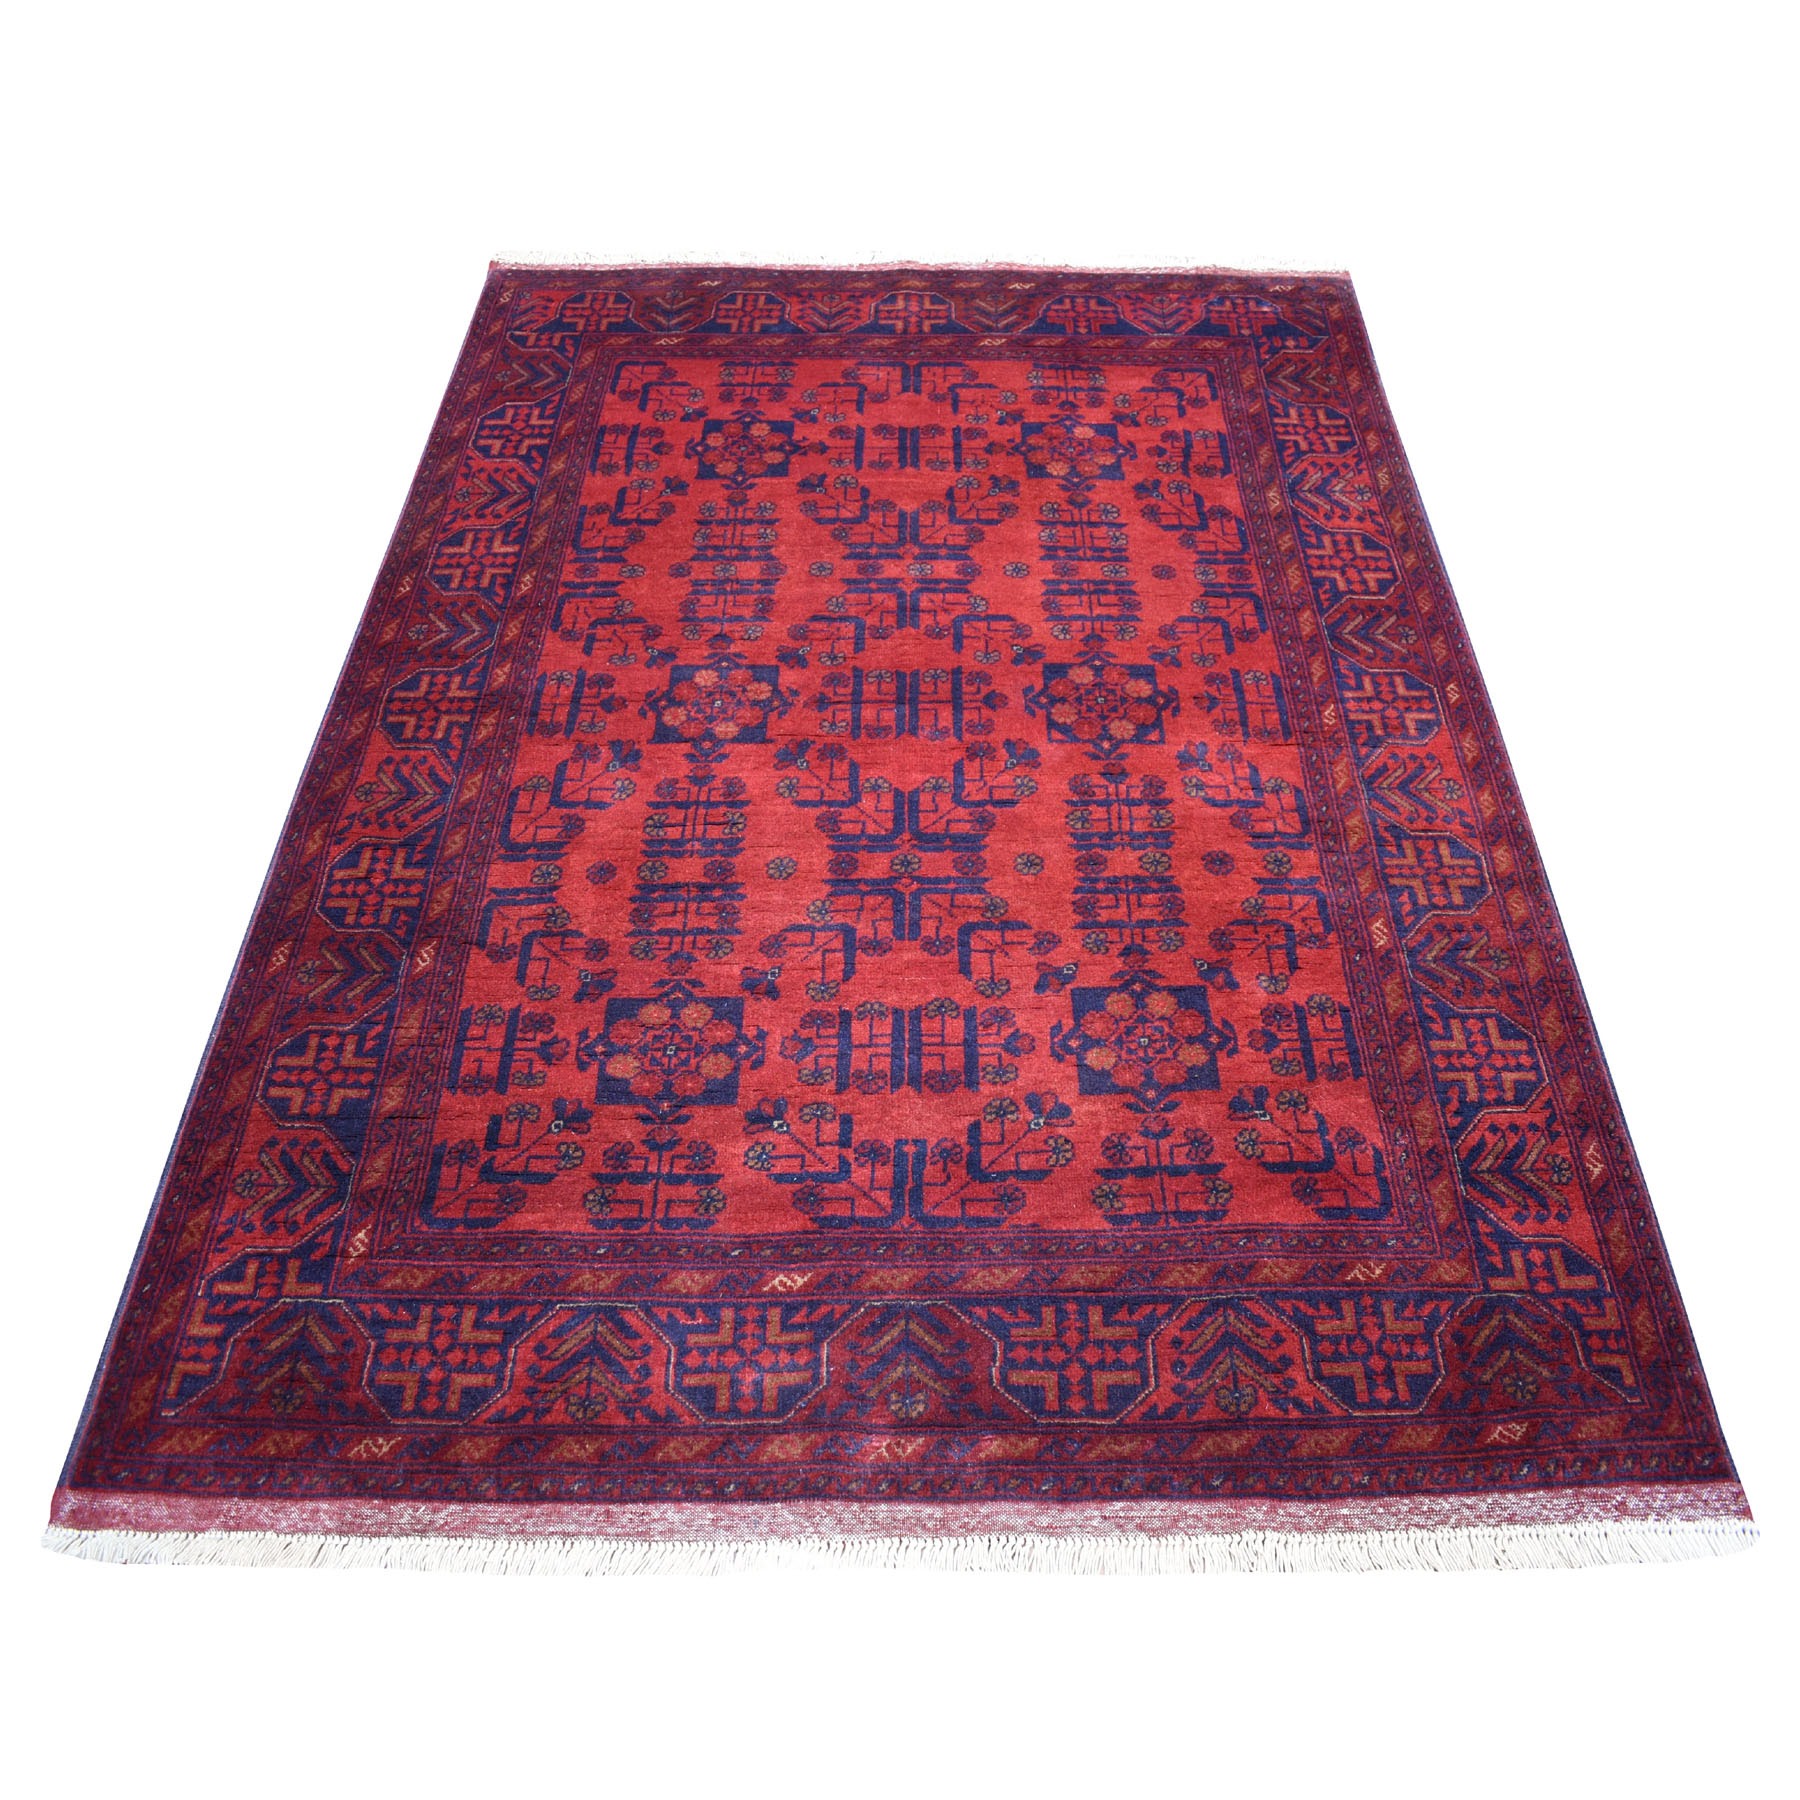 4'9"X6'5" Deep And Saturated Red Tribal Design Afghan Andkhoy Pure Wool Hand-Knotted Oriental Rug moaecd0a